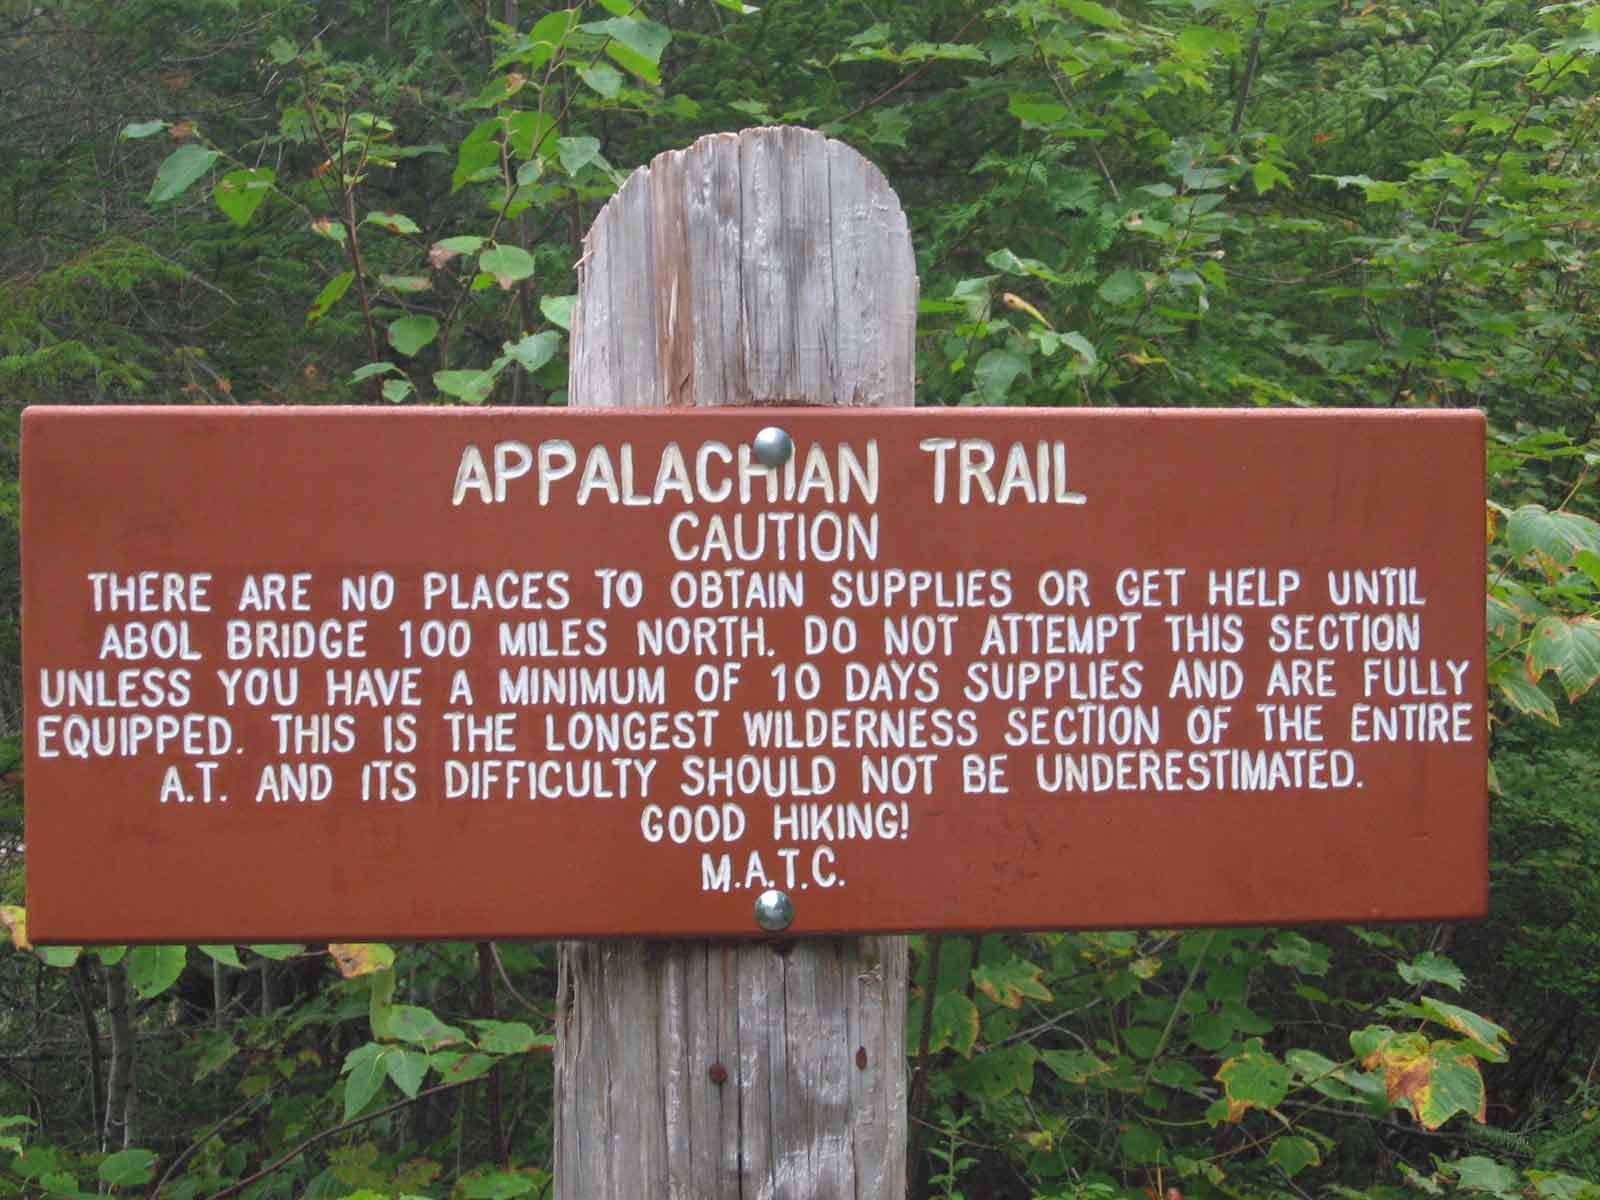 The sign at the start of the 100 mile wilderness.